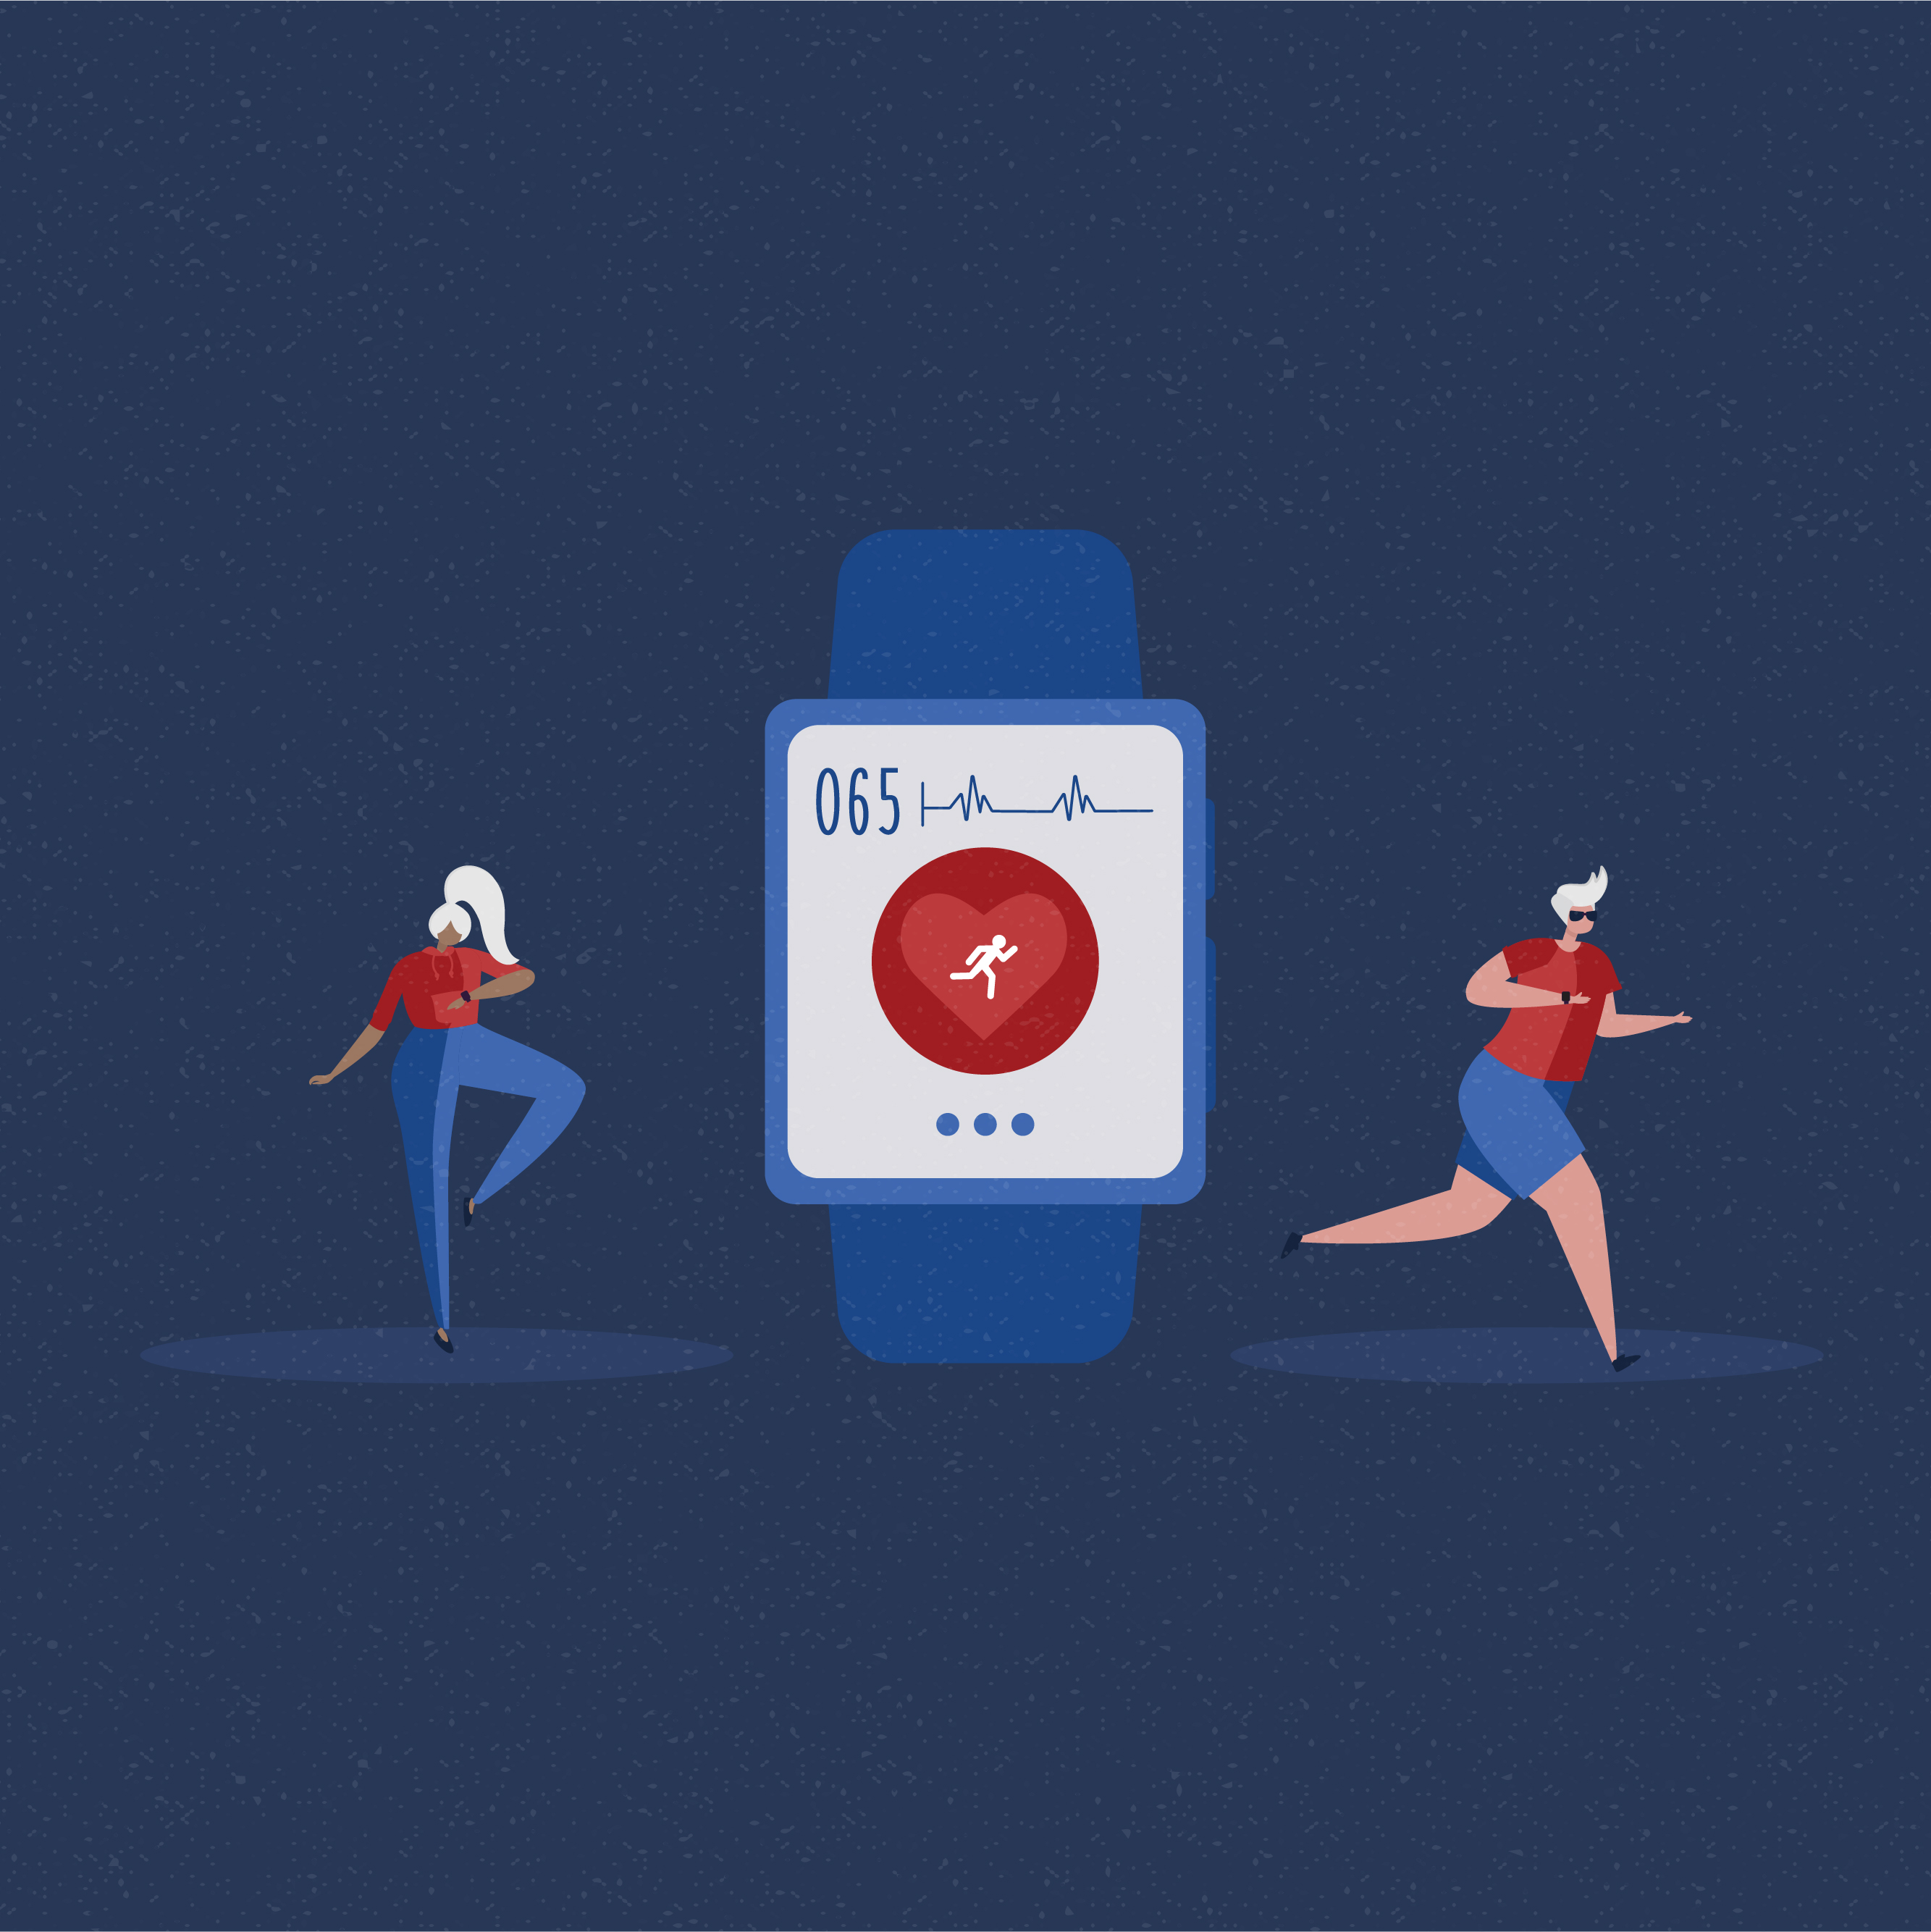 An illustration shows the elderly using a smartwatch